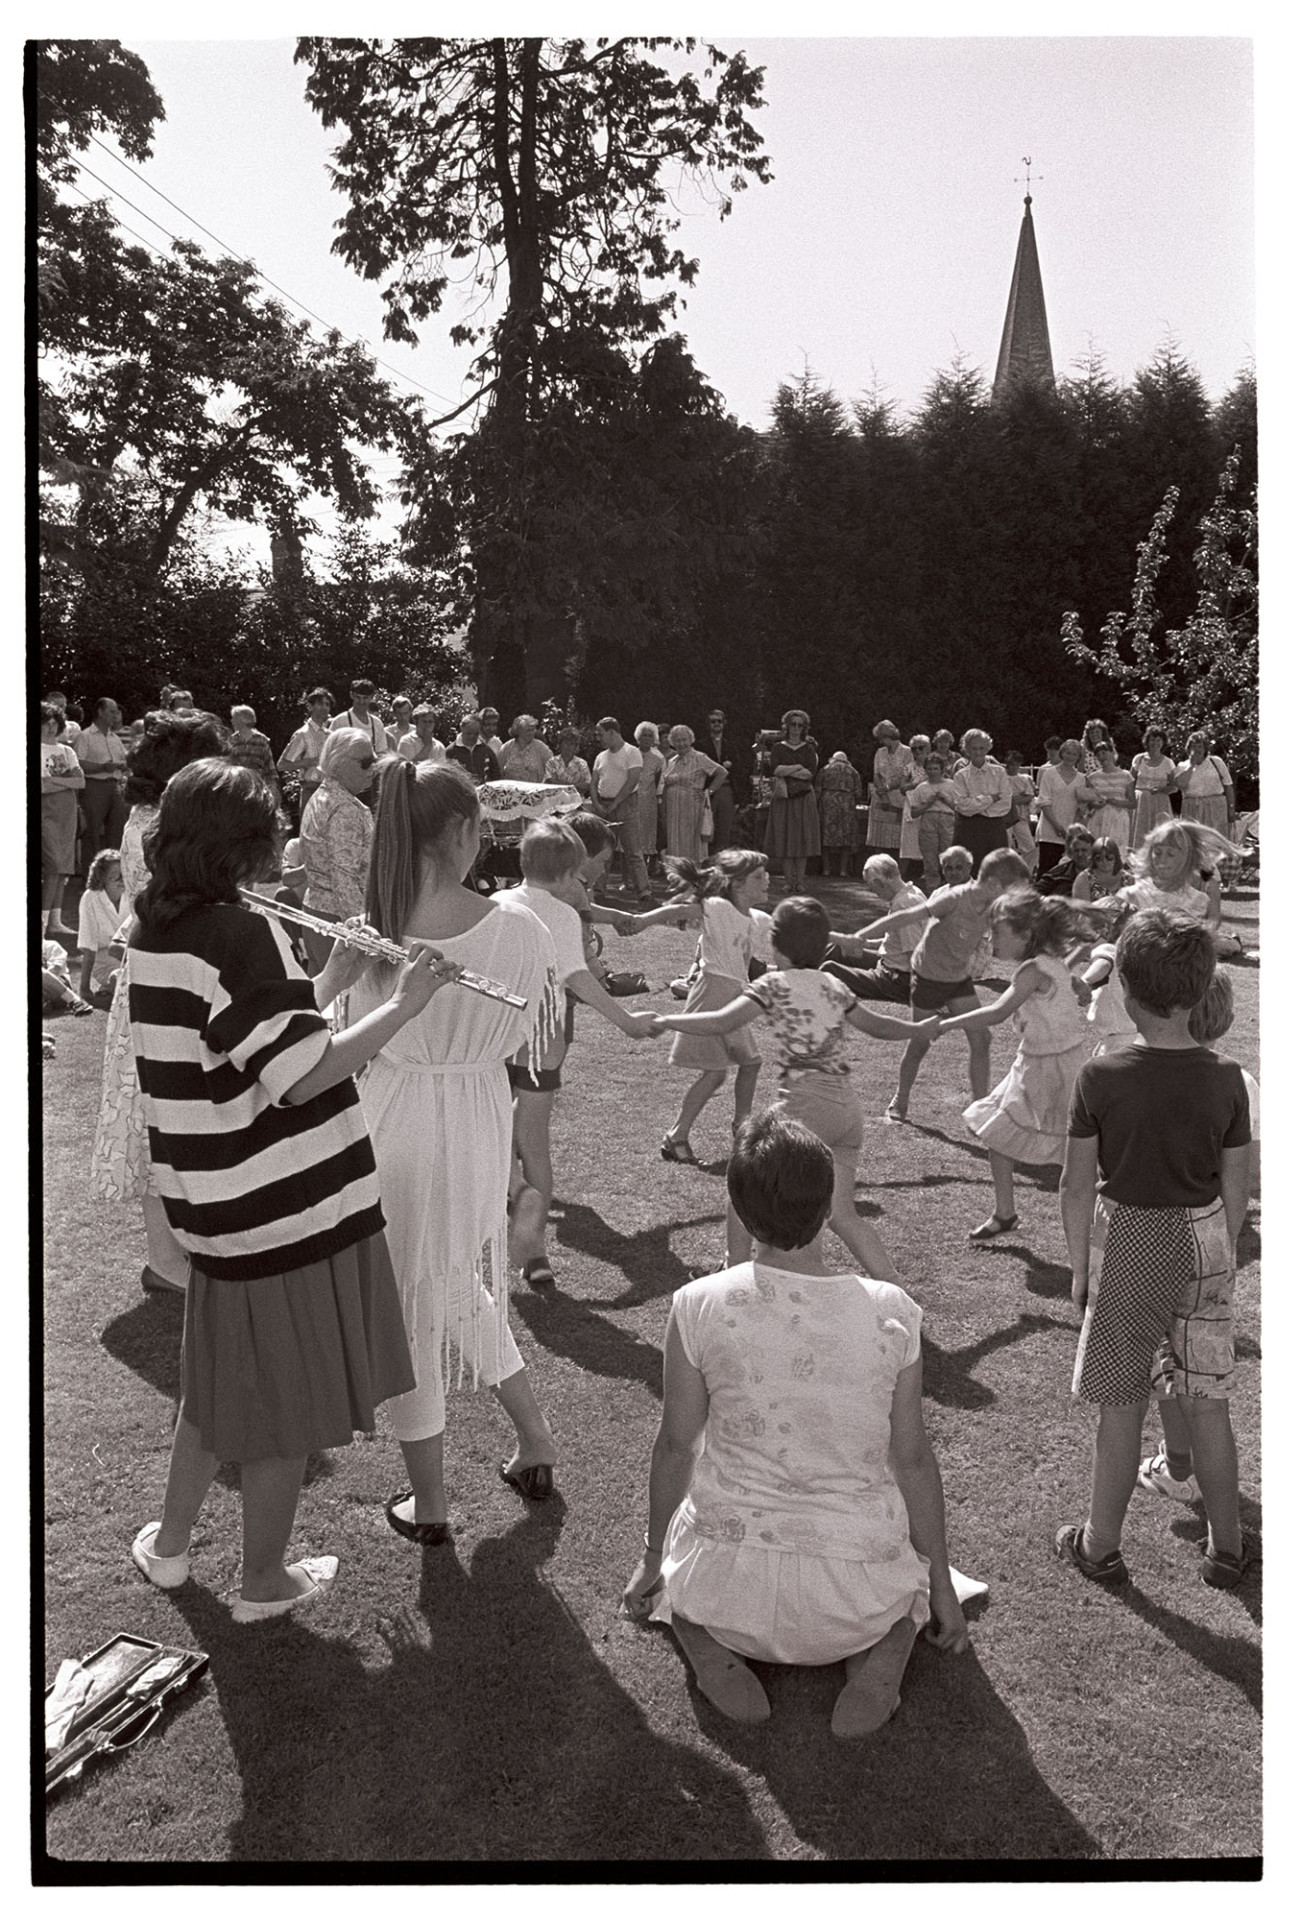 Vicarage fete, garden party children dancing to flute etc. 
[Children dancing in a circle to a woman playing a flute at the Vicarage fete at Kings Nympton. Spectators are watching in the background and the church spire can be seen behind the trees.]